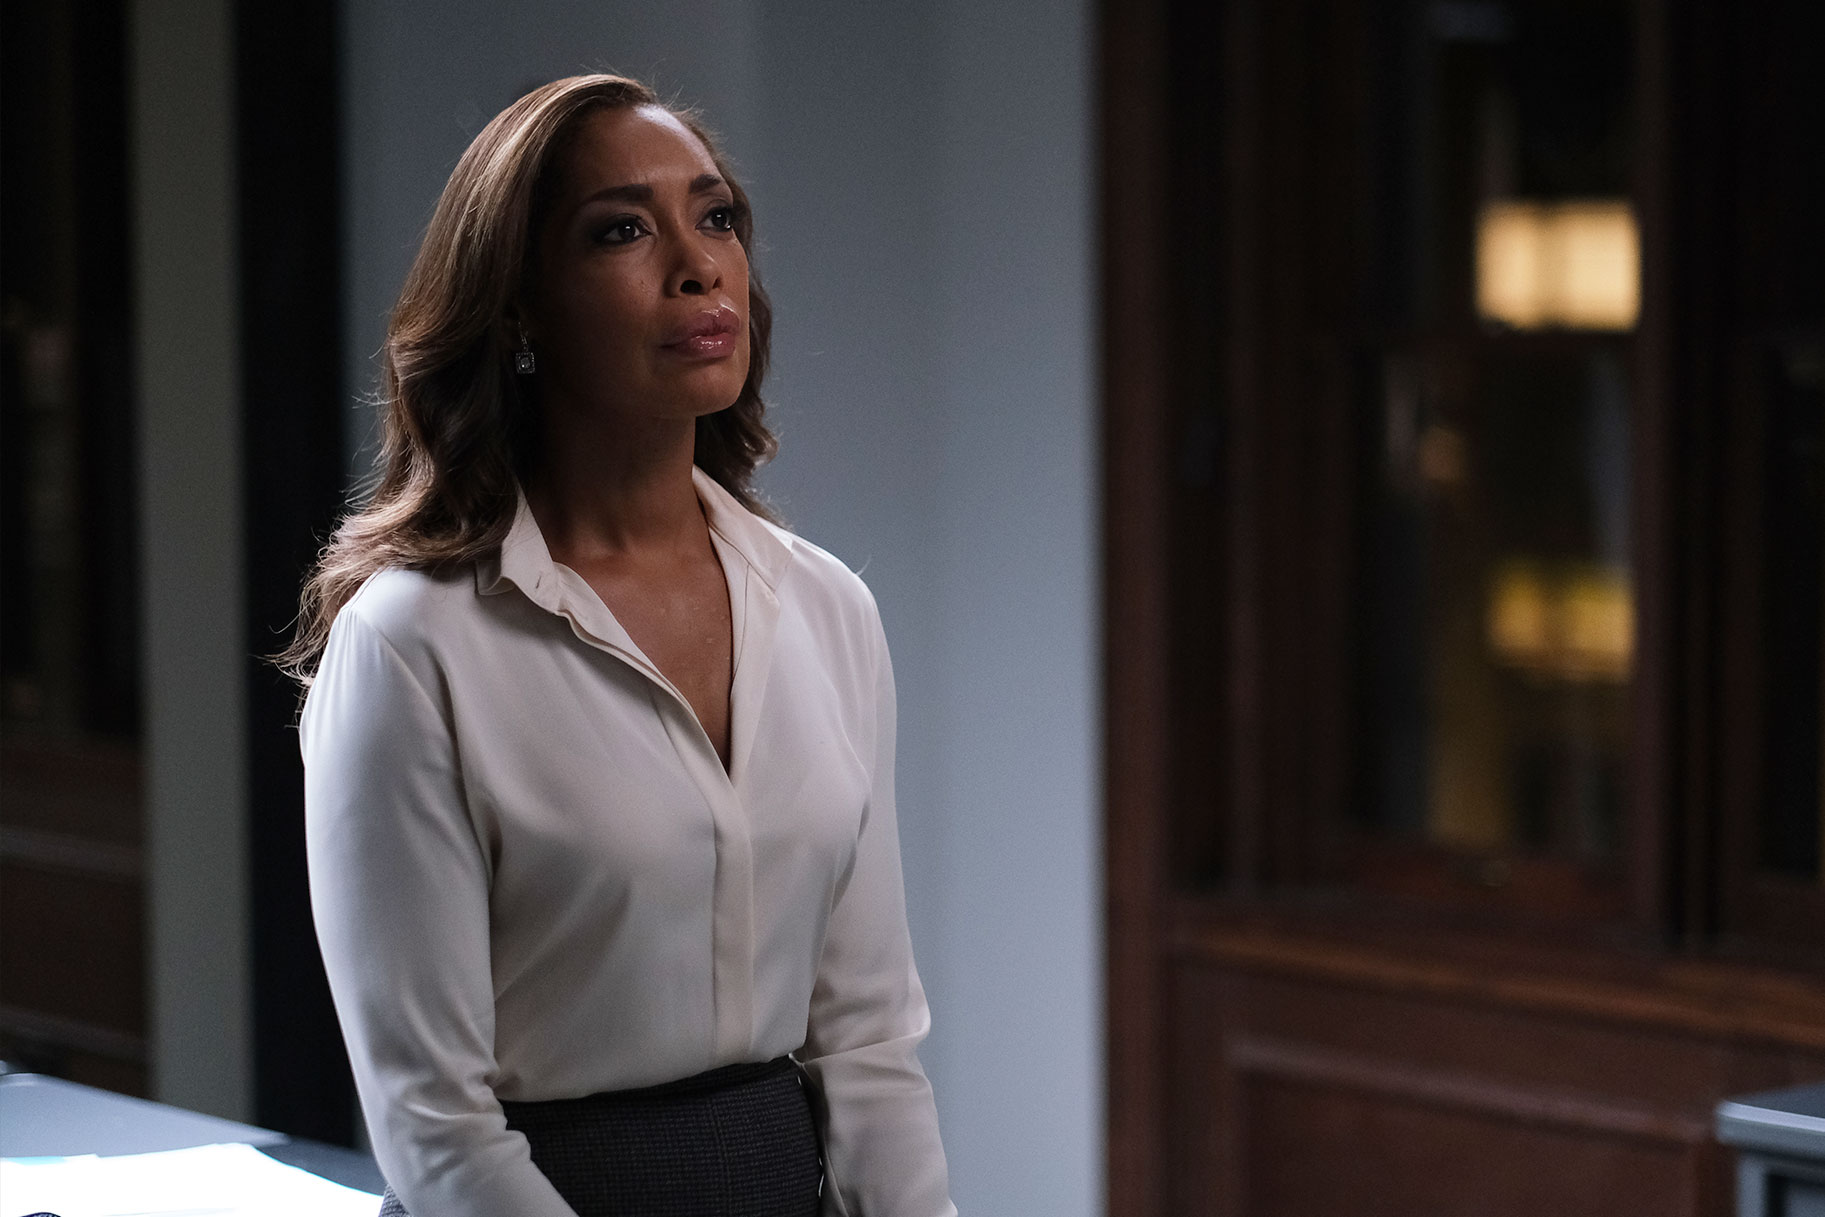 Gina Torres as Jessica Pearson looking thoughtful in a scene from Pearson